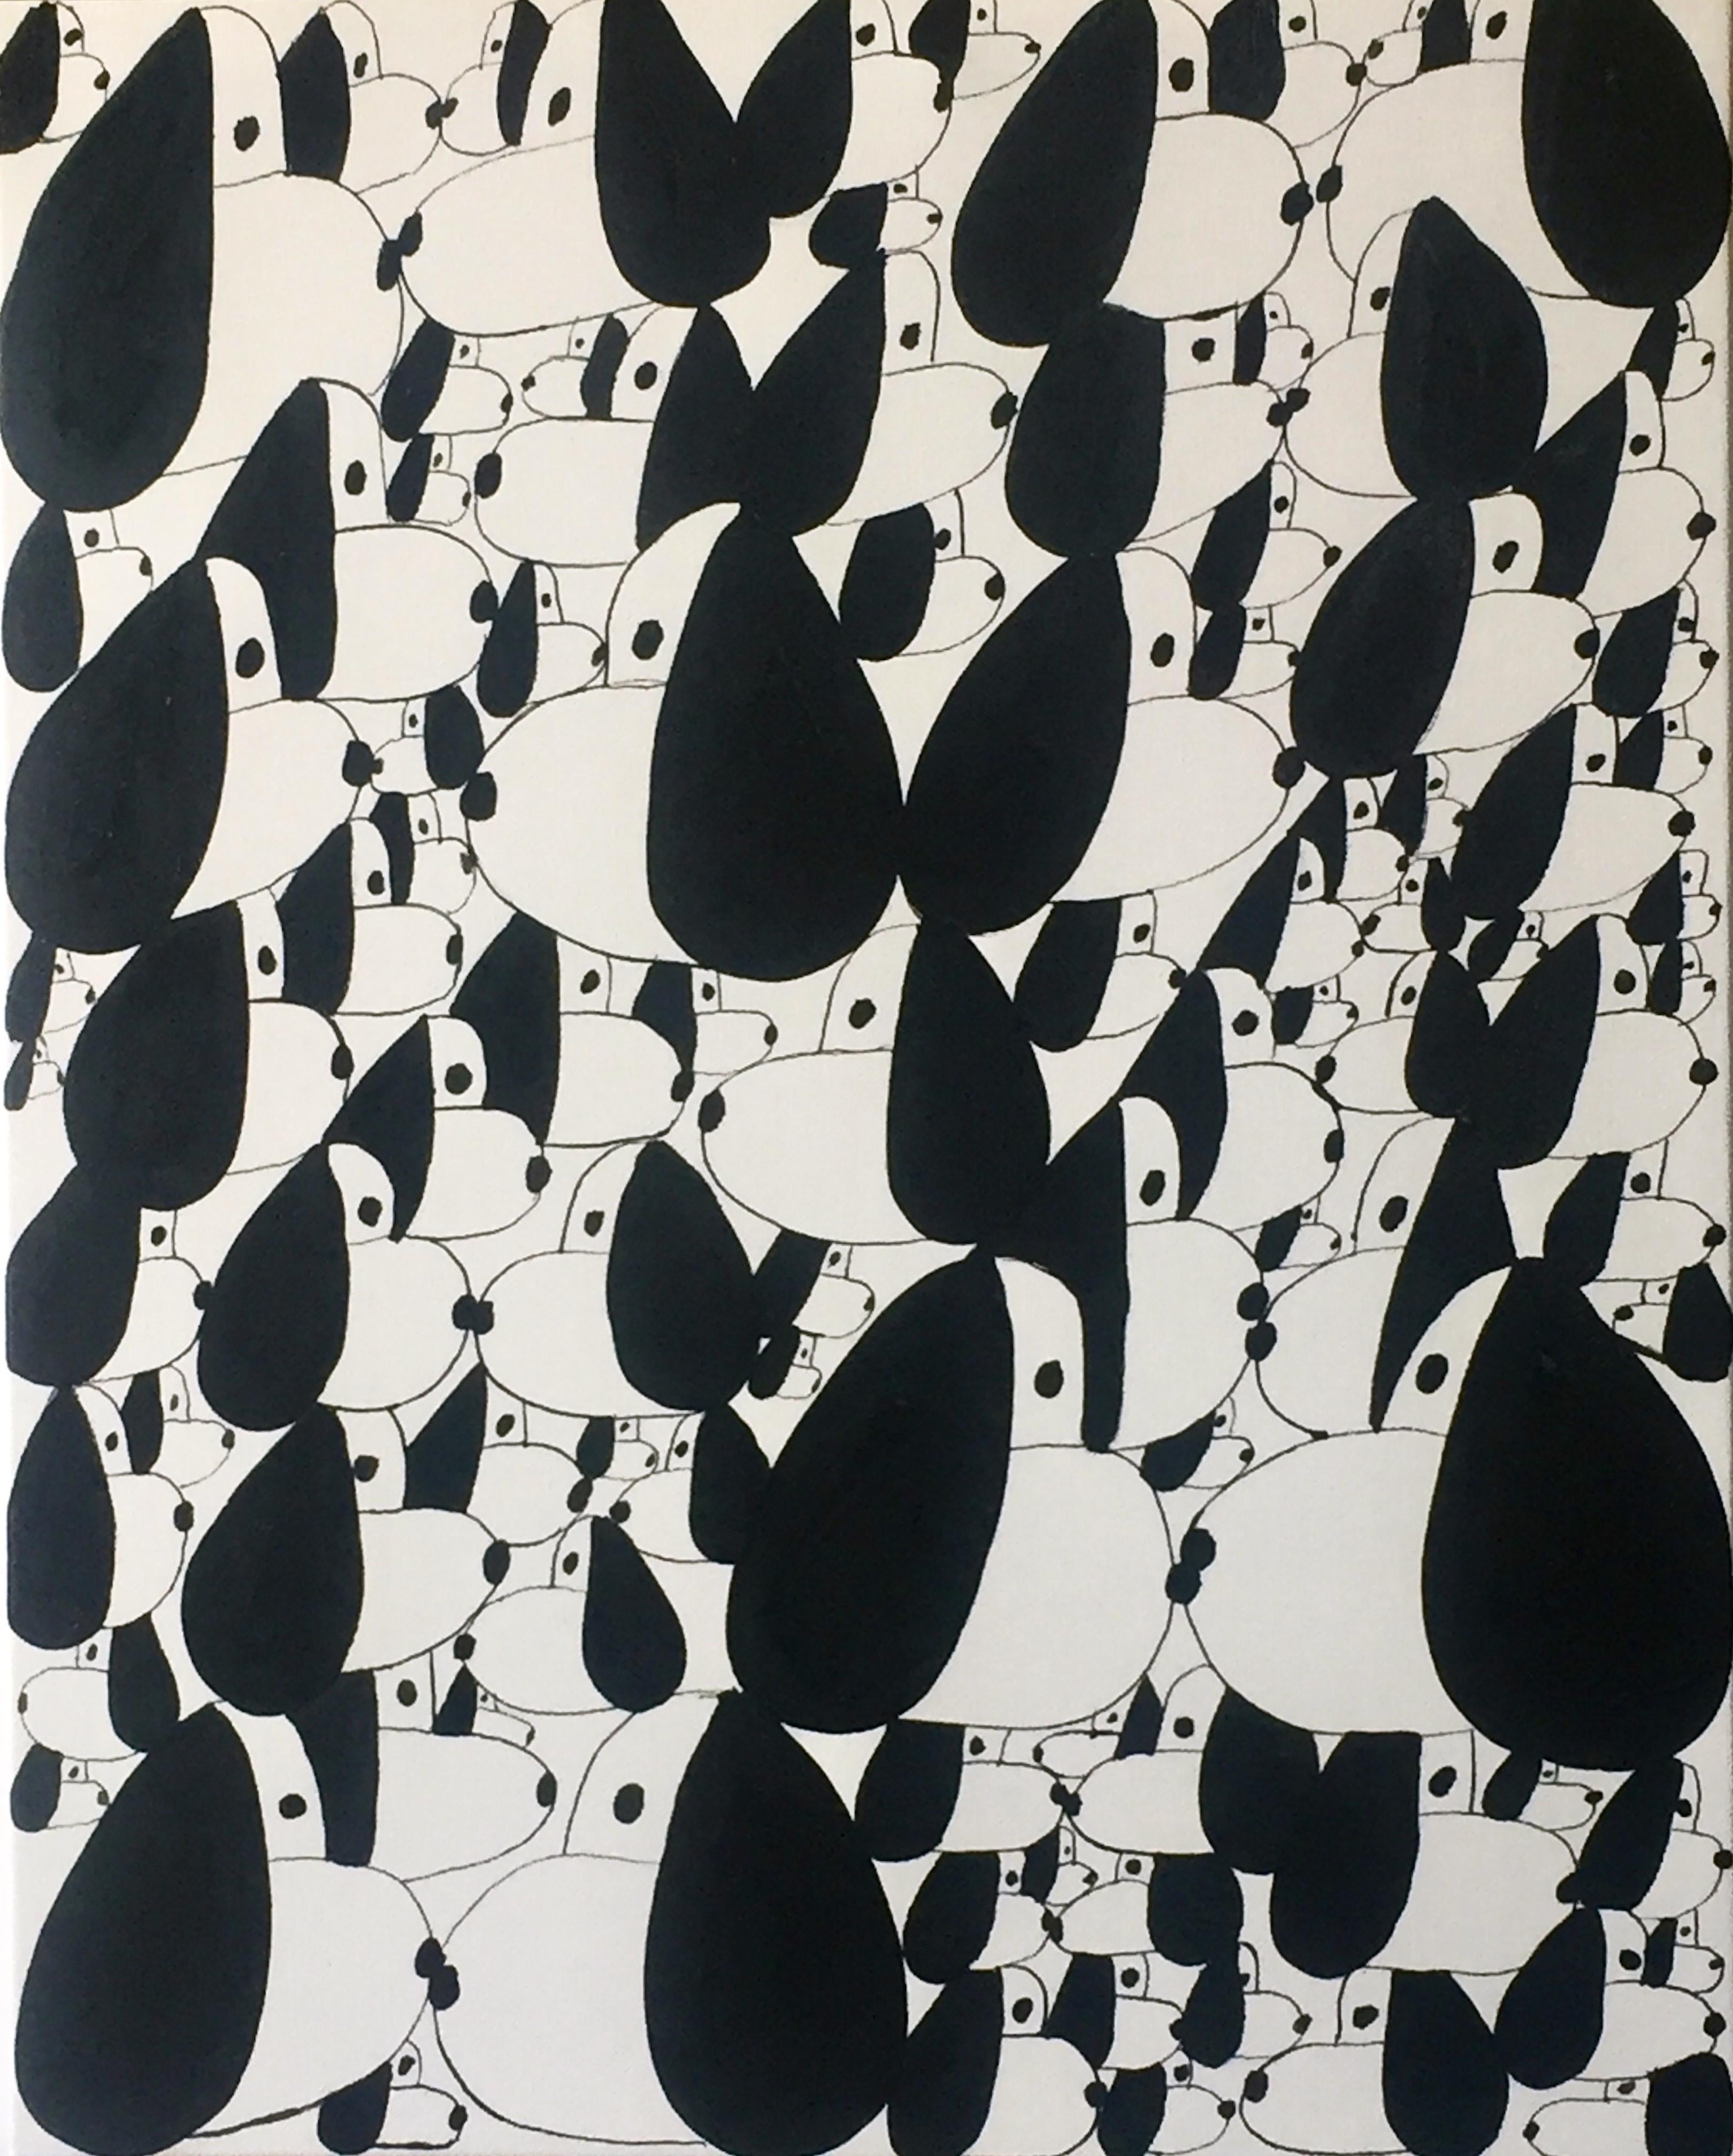 Nina Bovasso Animal Painting - Black and White Snoopies in a Crowd Painting on Canvas 16x20 inches